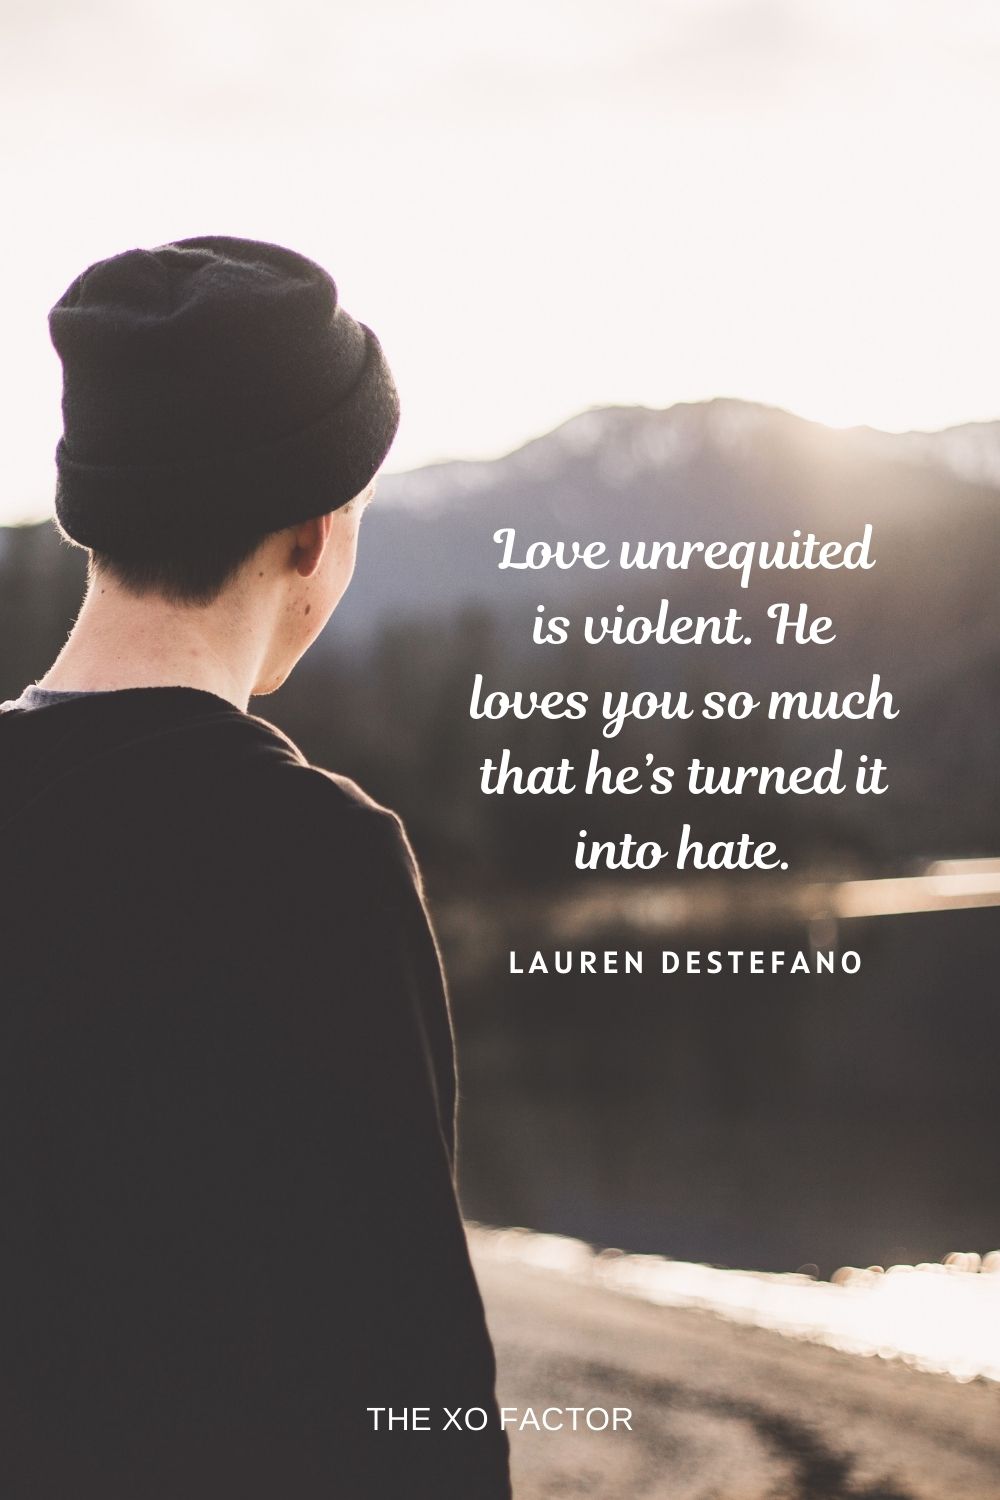 Love unrequited is violent. He loves you so much that he’s turned it into hate. Lauren DeStefano